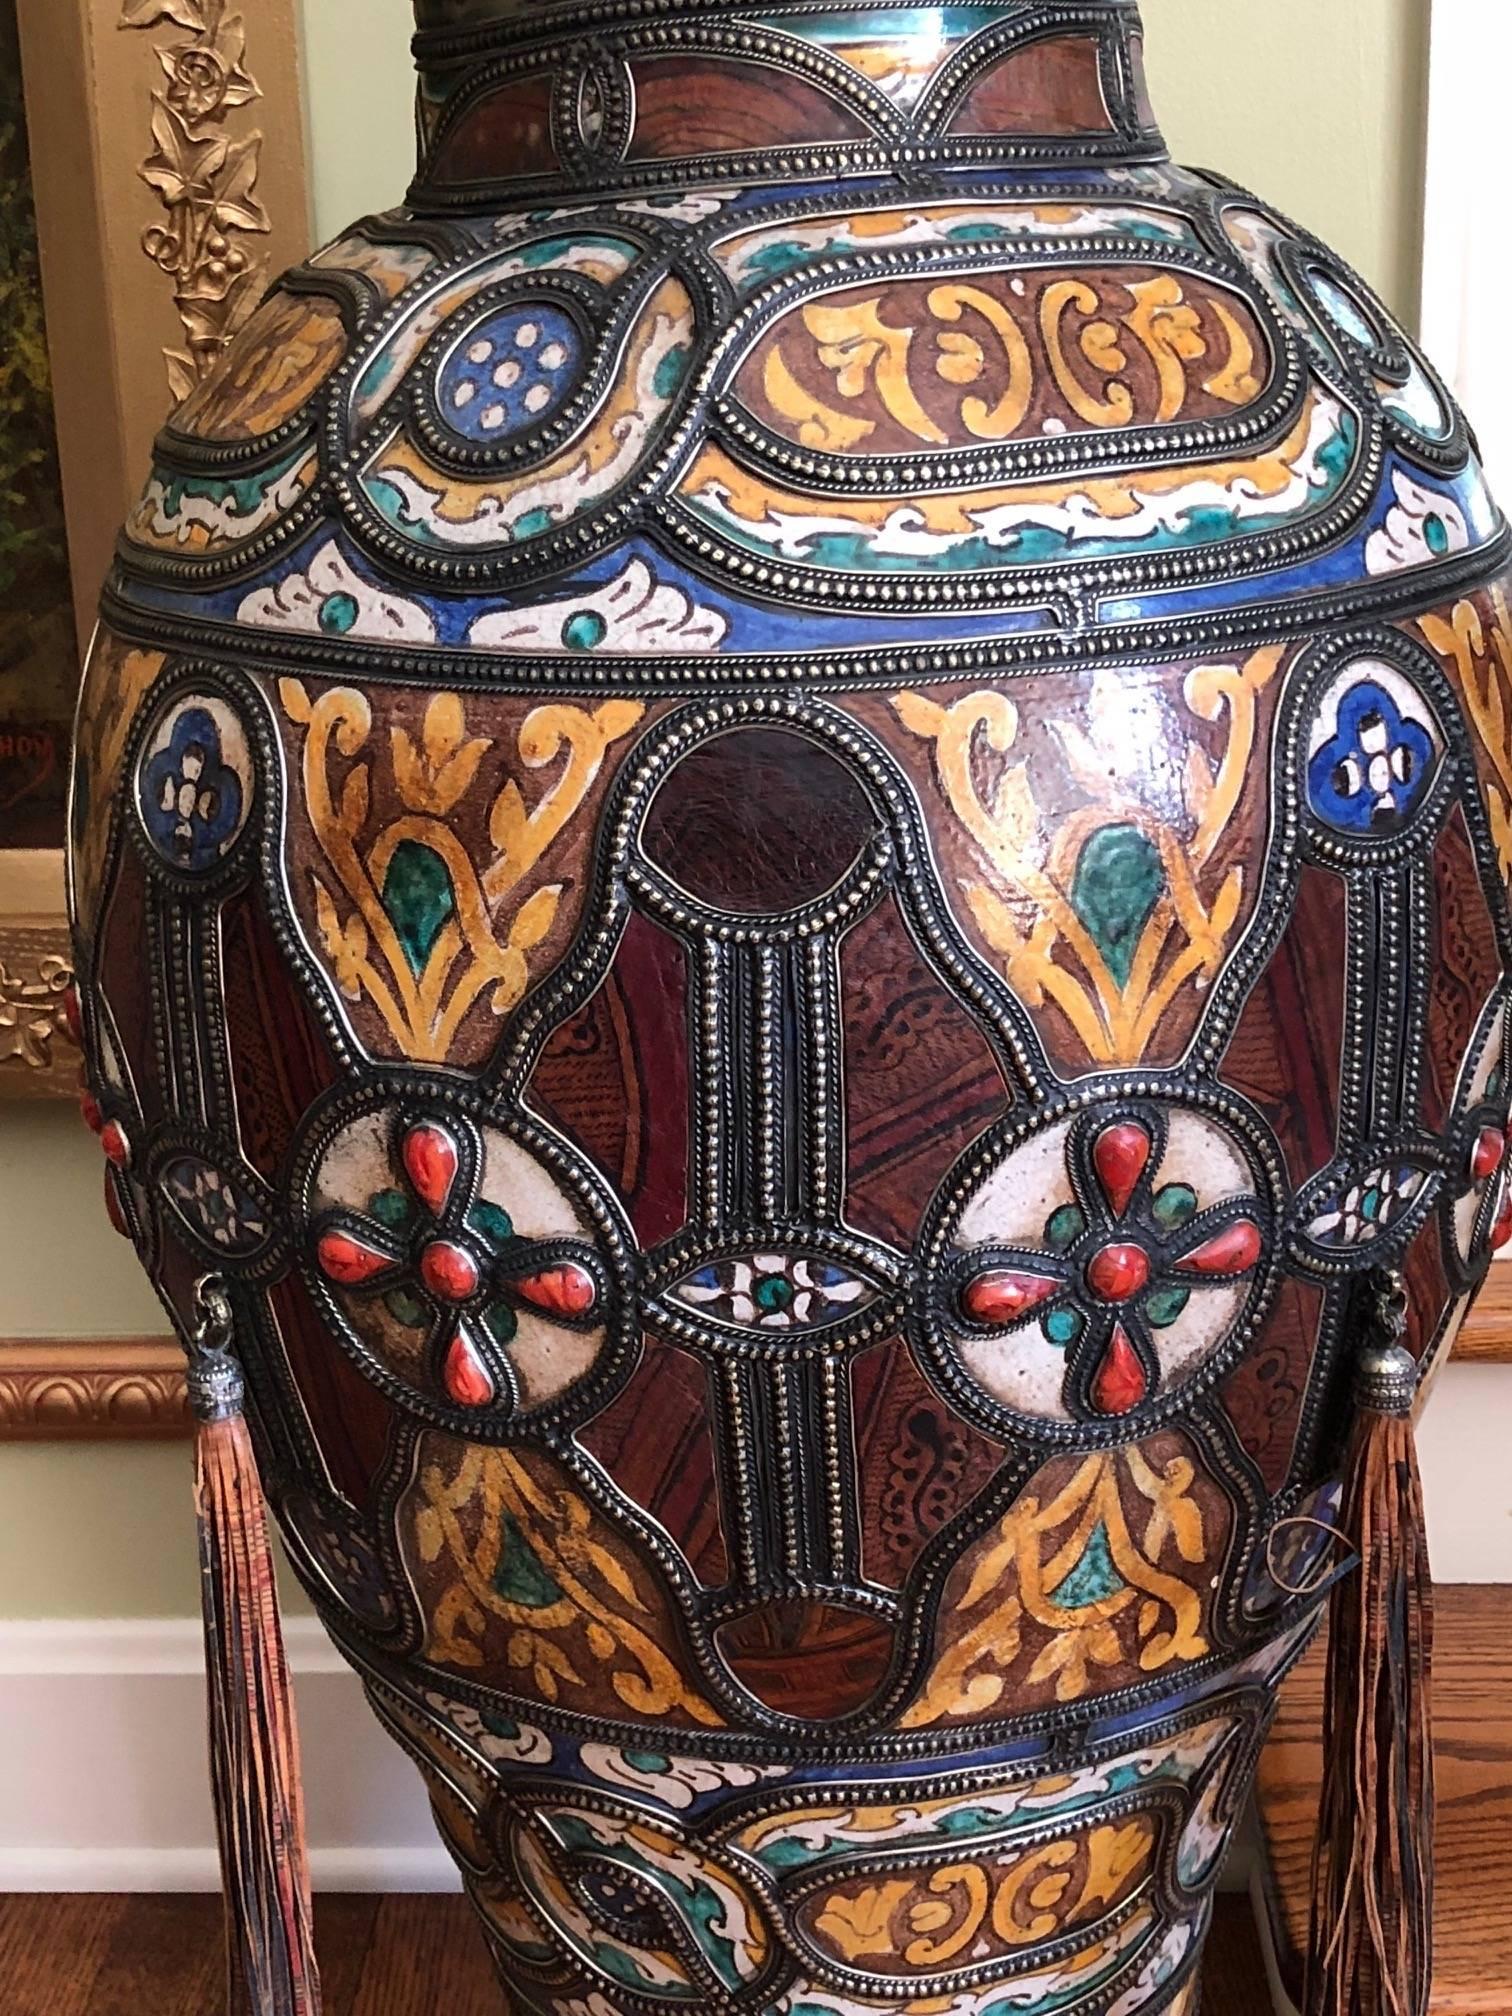 Large Moroccan Porcelain and Metal Palace Urn In Excellent Condition For Sale In Washington Crossing, PA